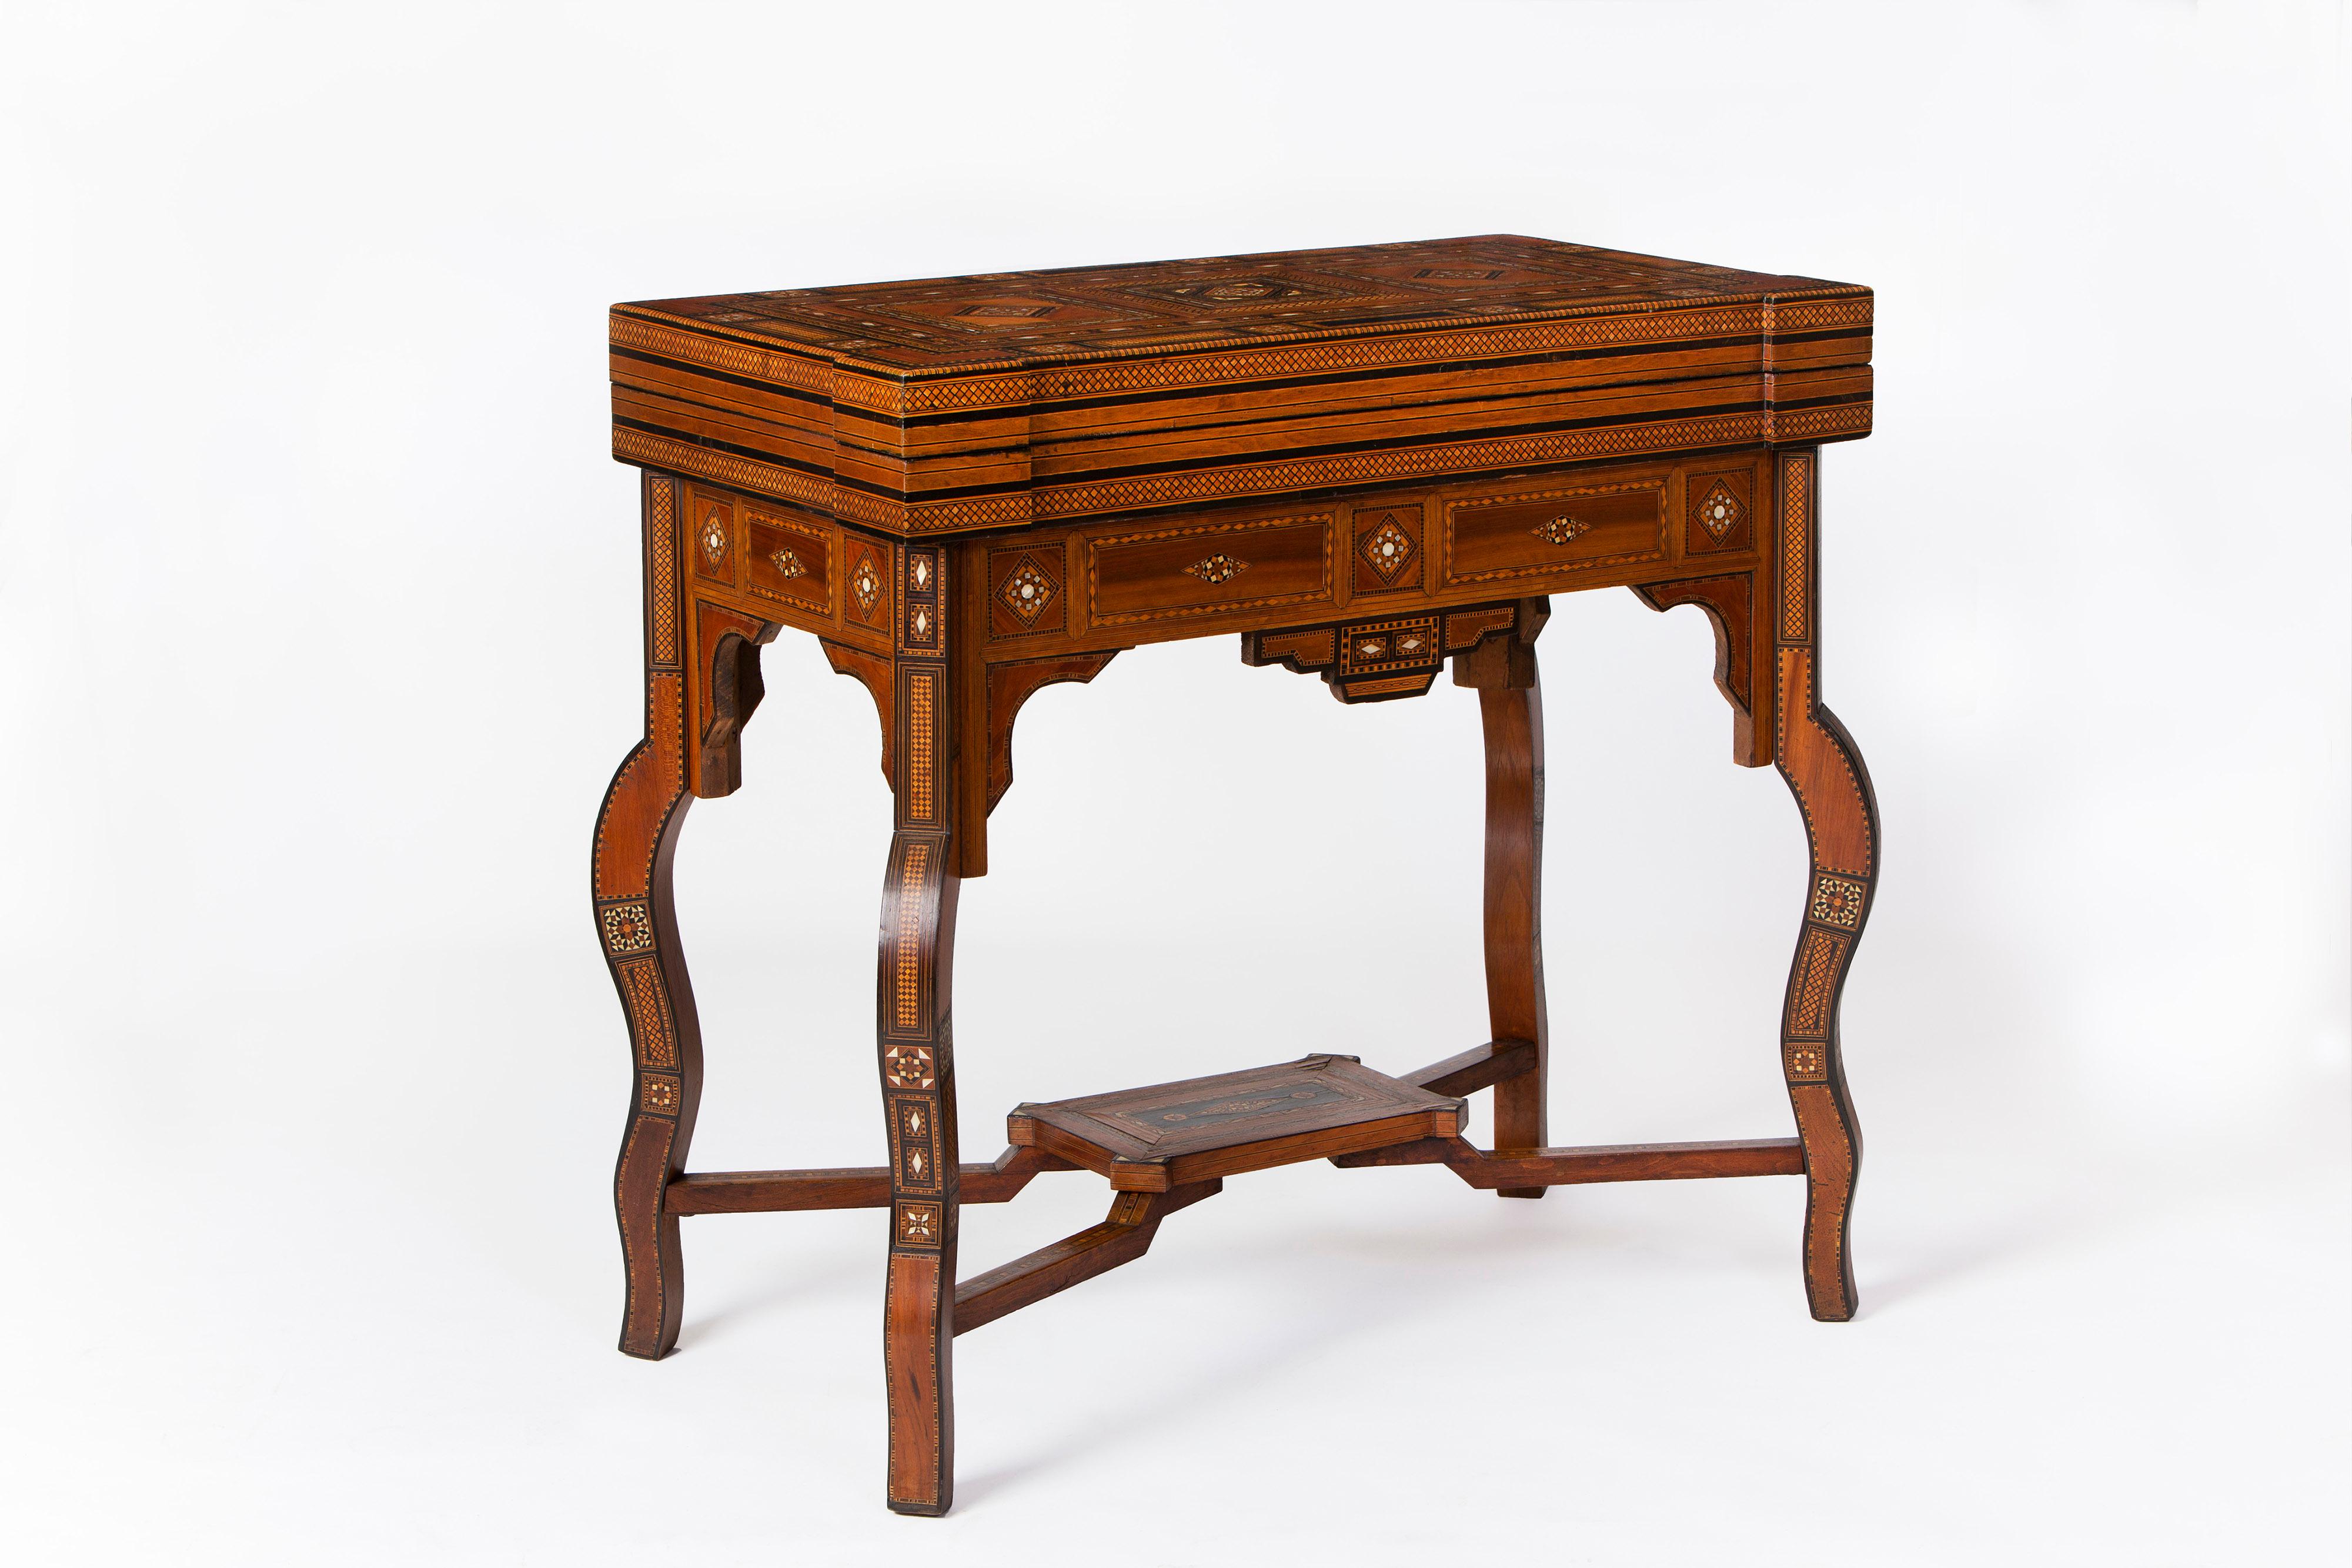 Exceptional Syrian games table, late 19th century sitting on cabriole shaped legs, united by a stepped stretcher which has a central shelf, and all decorated with a profusion of inlayed exotic woods including ebony, Santos rosewood, kingwood,